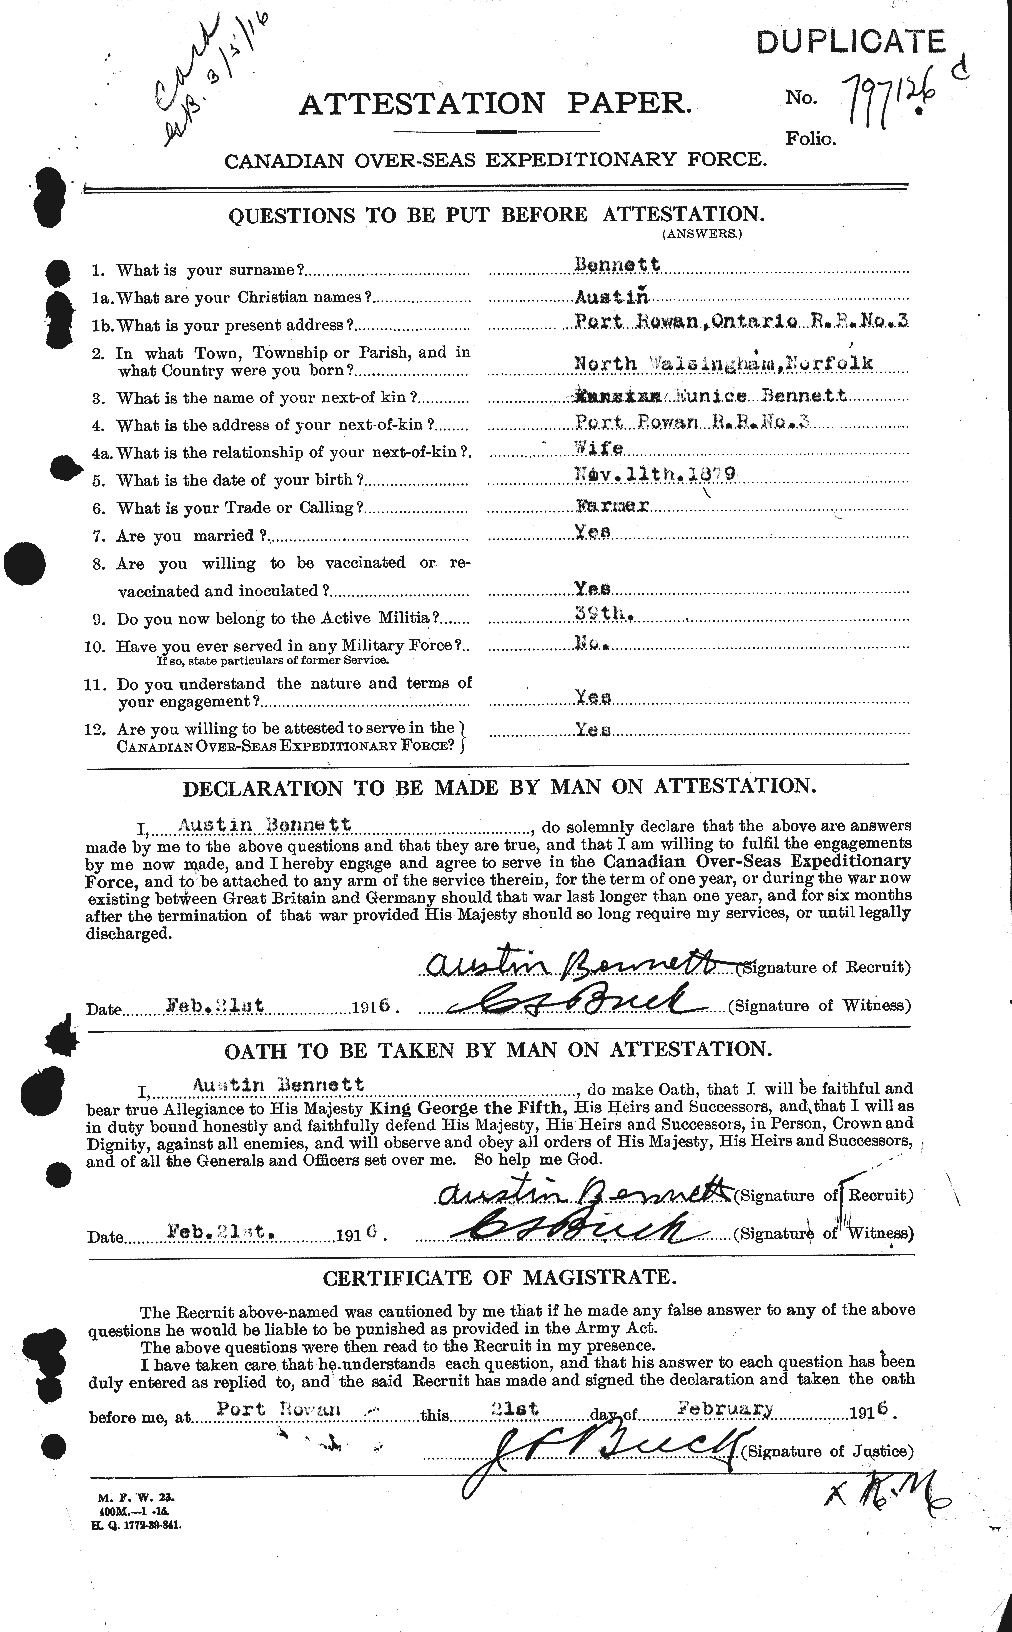 Personnel Records of the First World War - CEF 233354a